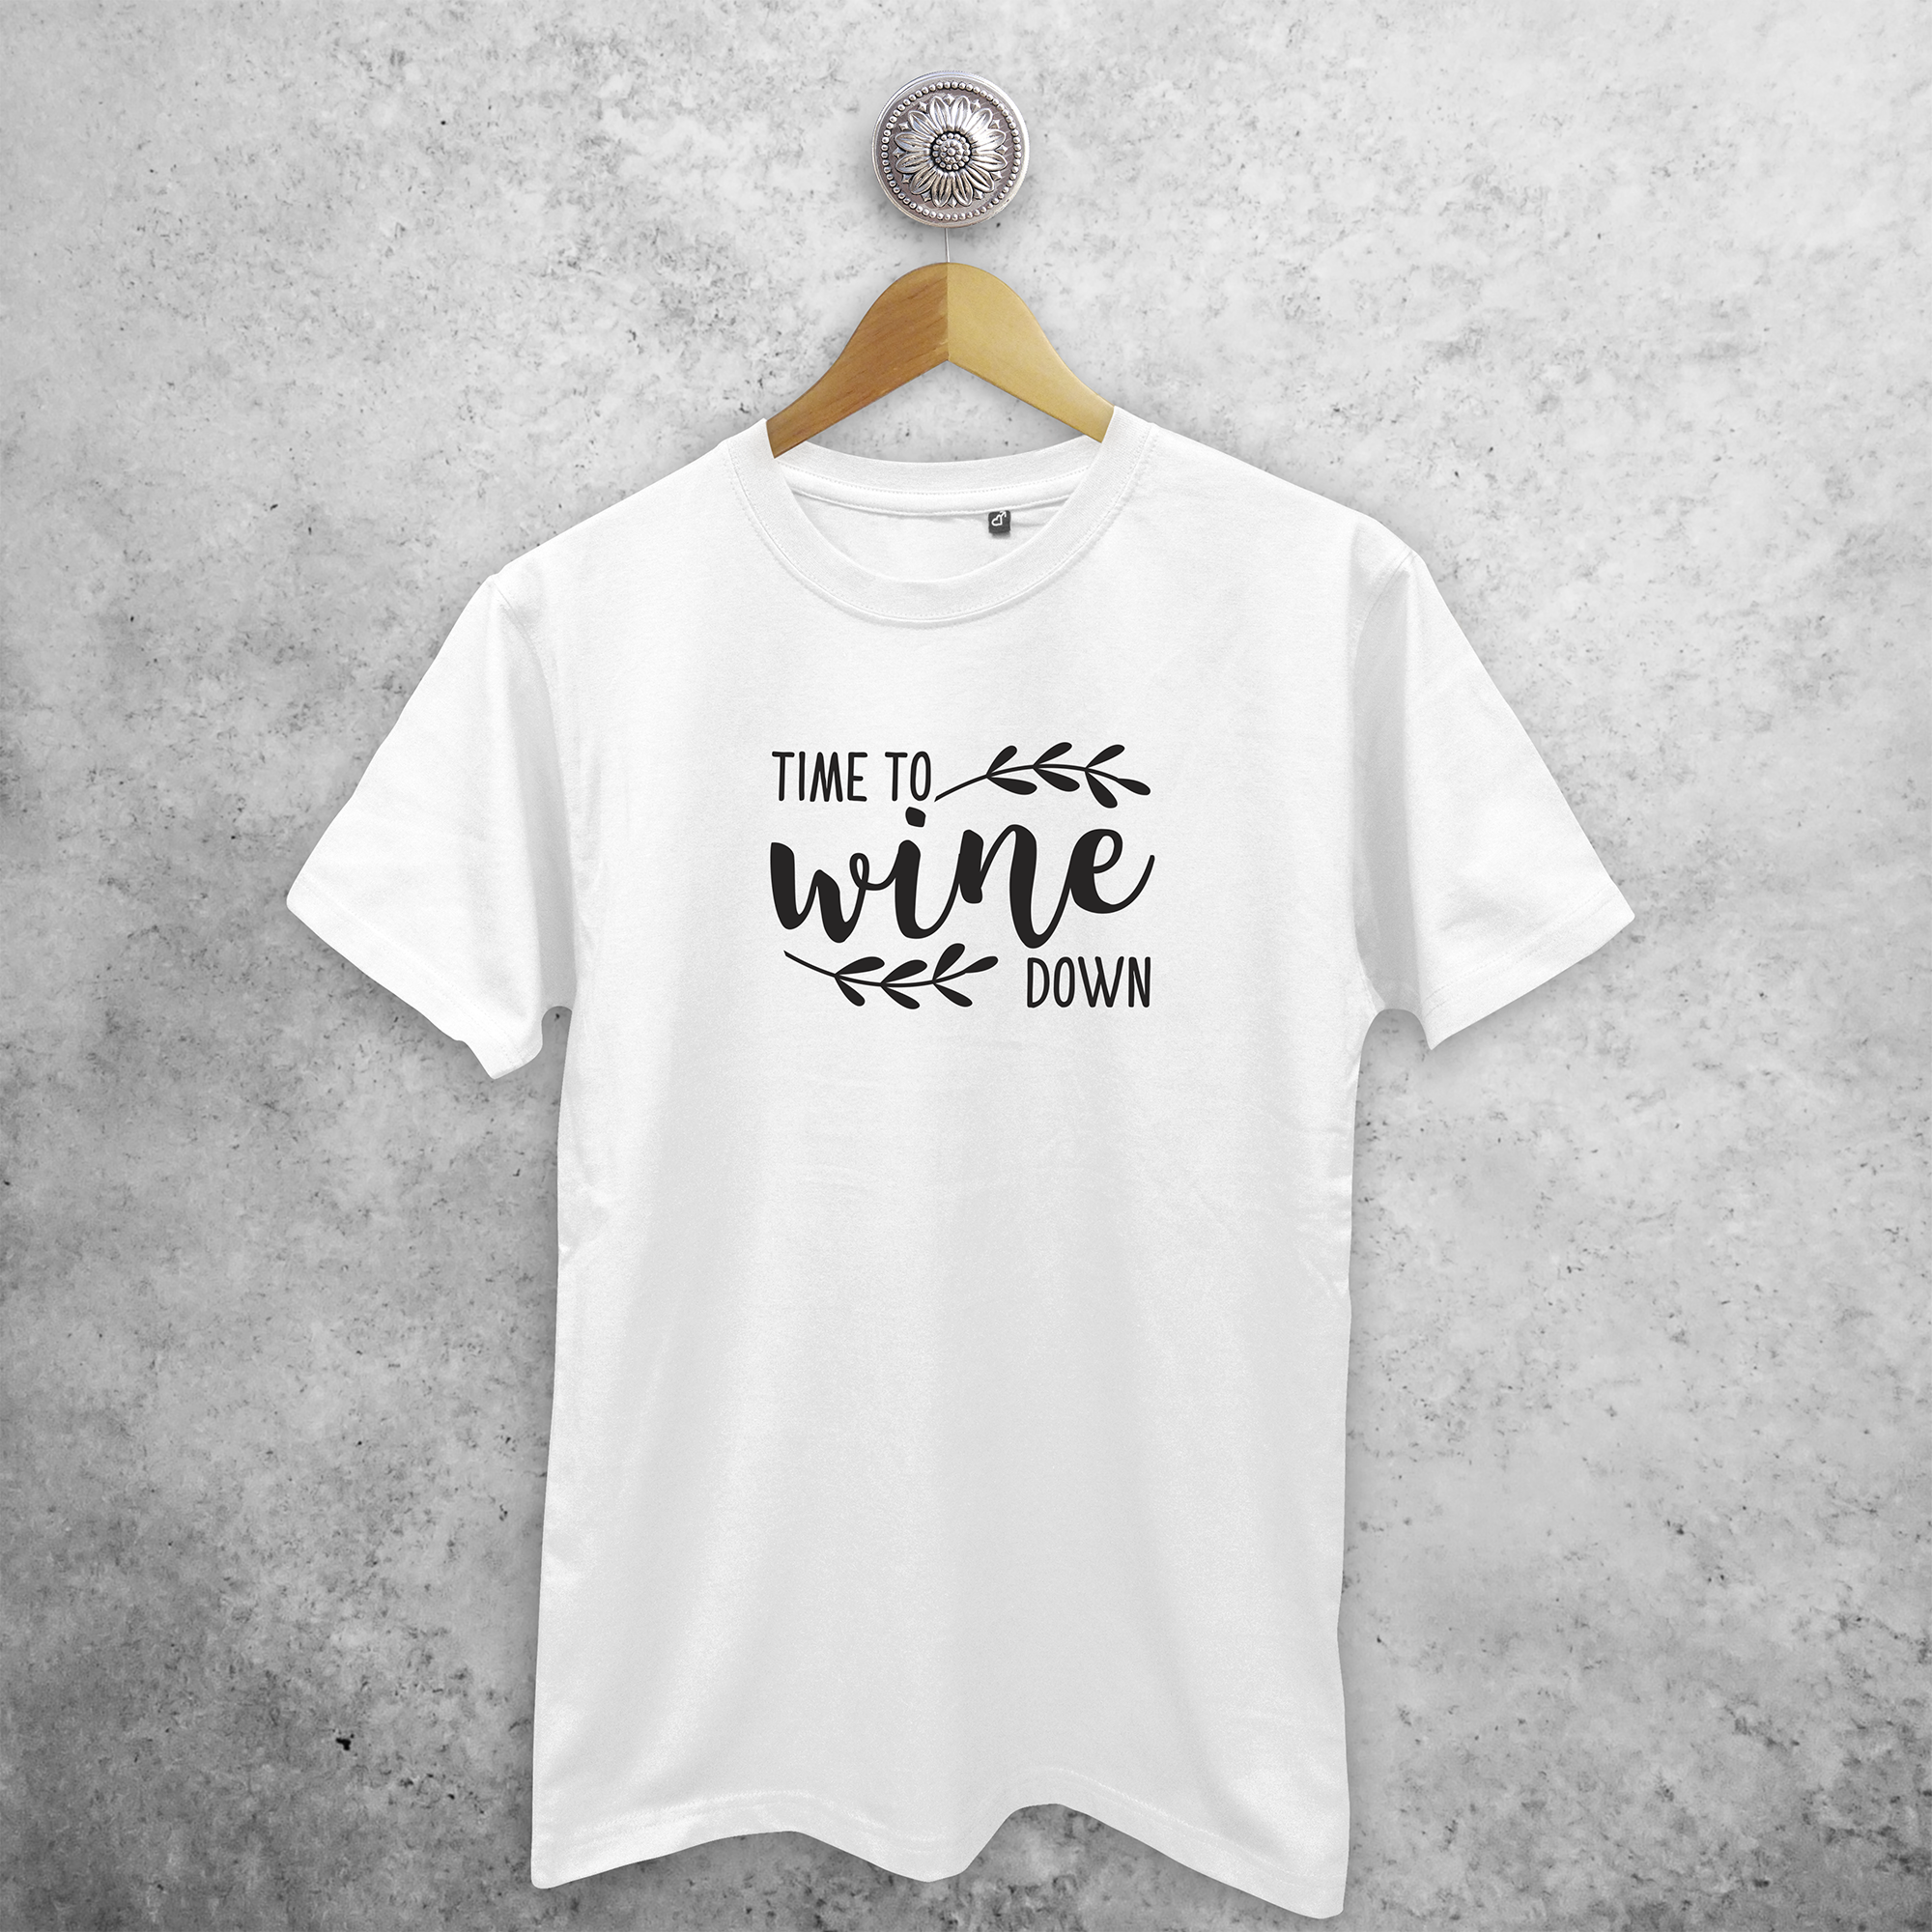 'Time to wine down' adult shirt